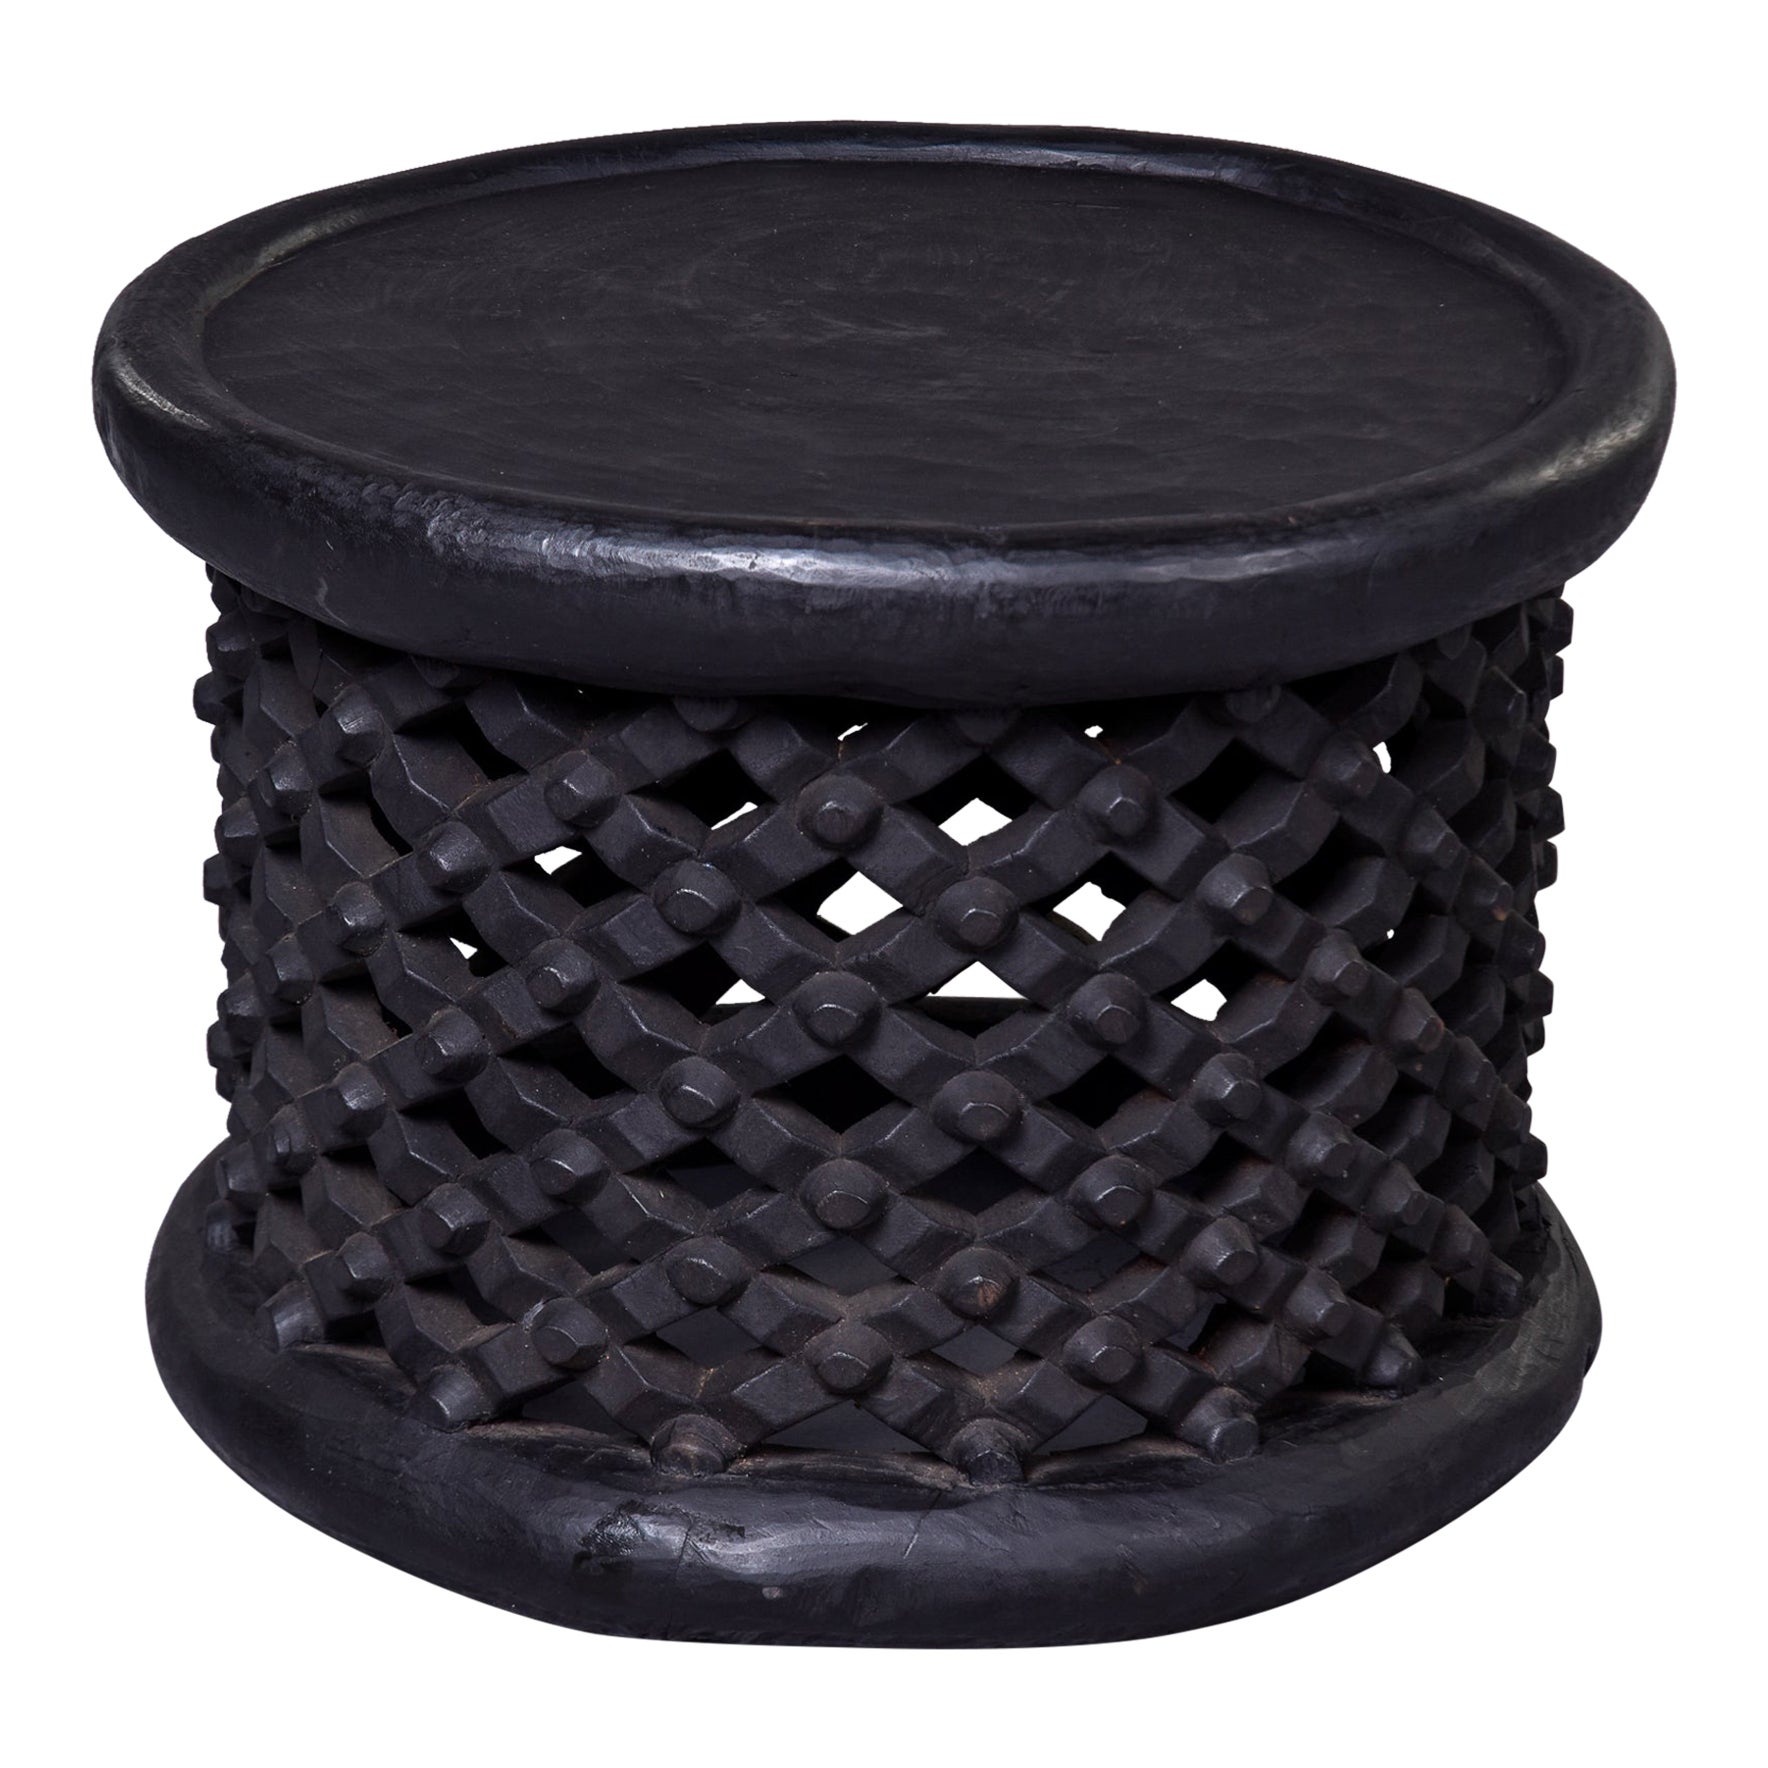 Vintage Hand Carved African Bamileke Stool or Table from Cameroon